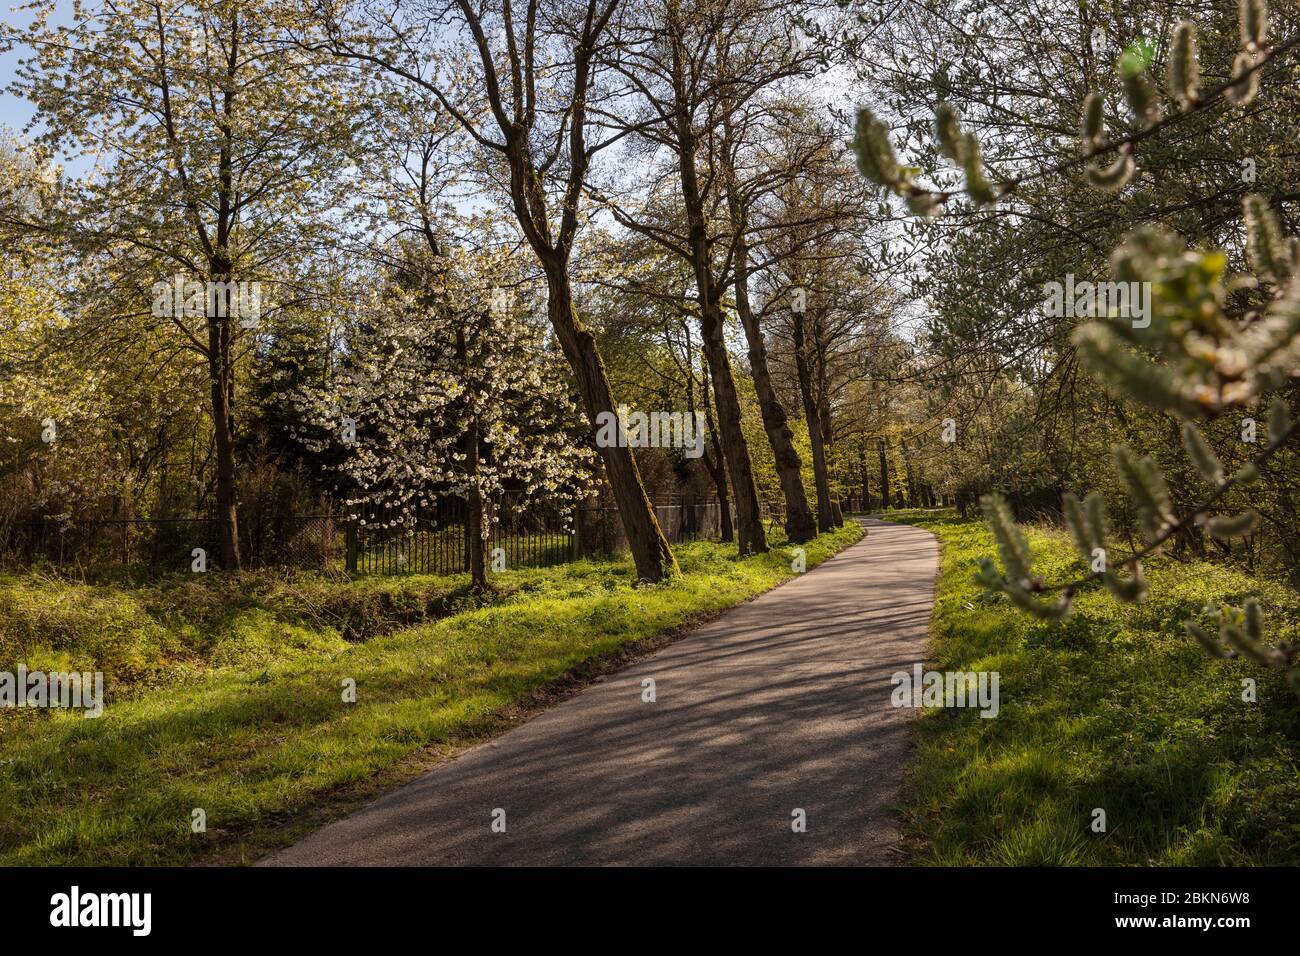 A view of the rural area near the Philips de Jongh Park and Strijp R in Eindhoven City on a sunny day. Dutch nature with a path, trees with blossoms a Stock Photo